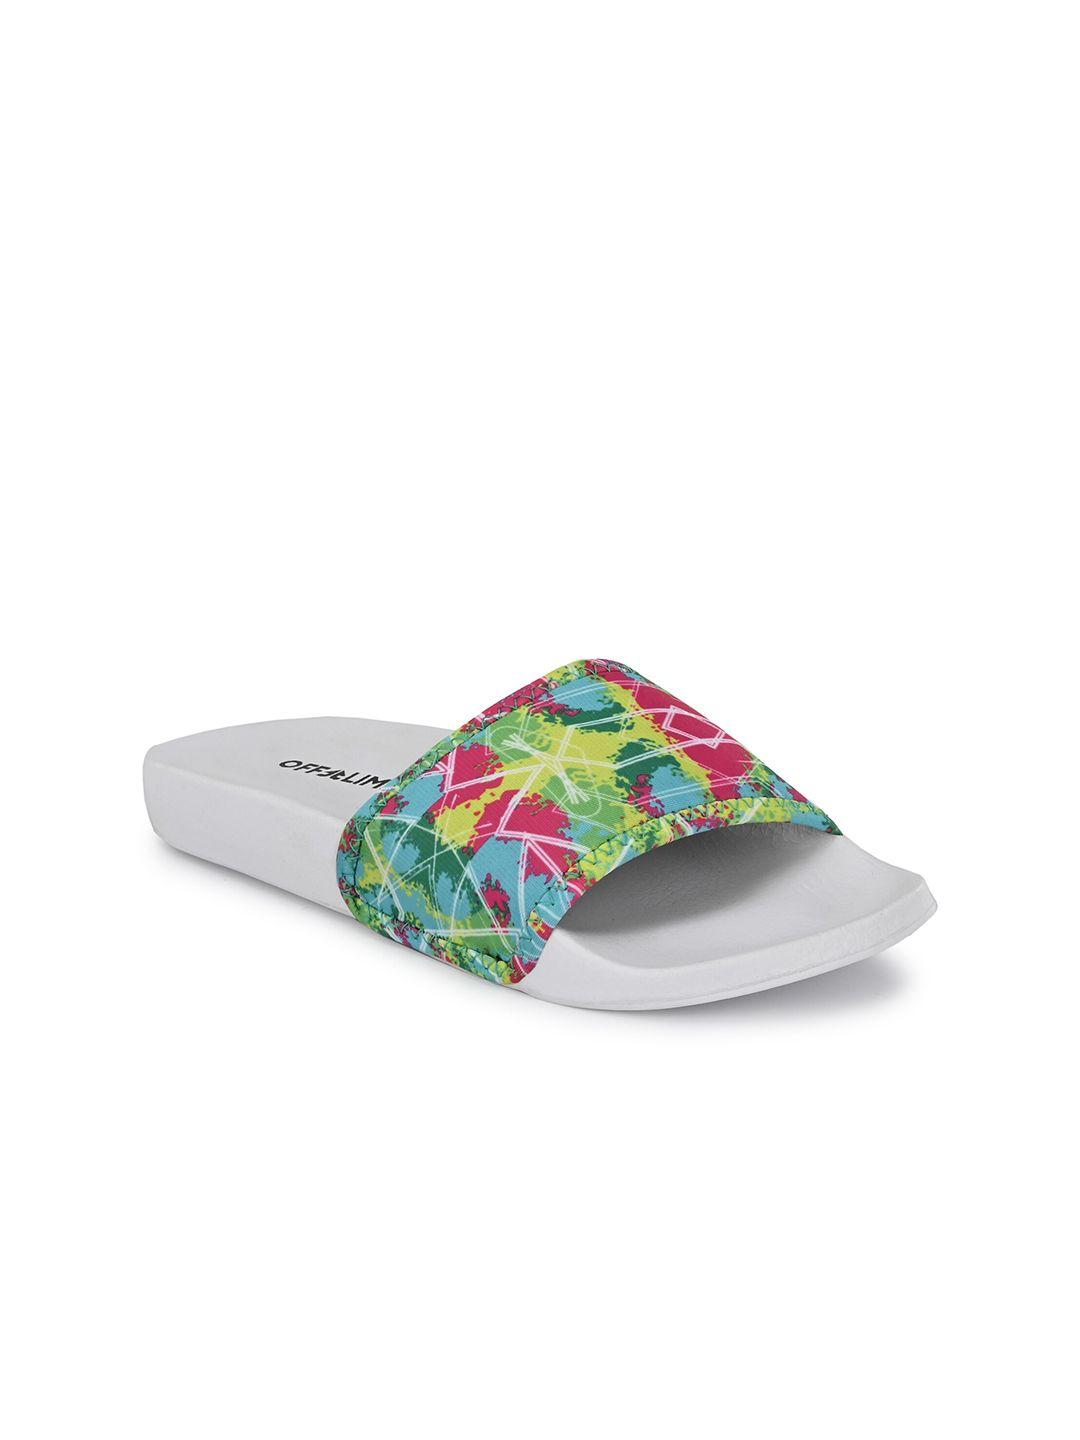 off-limits-women-multi-color-printed-sliders